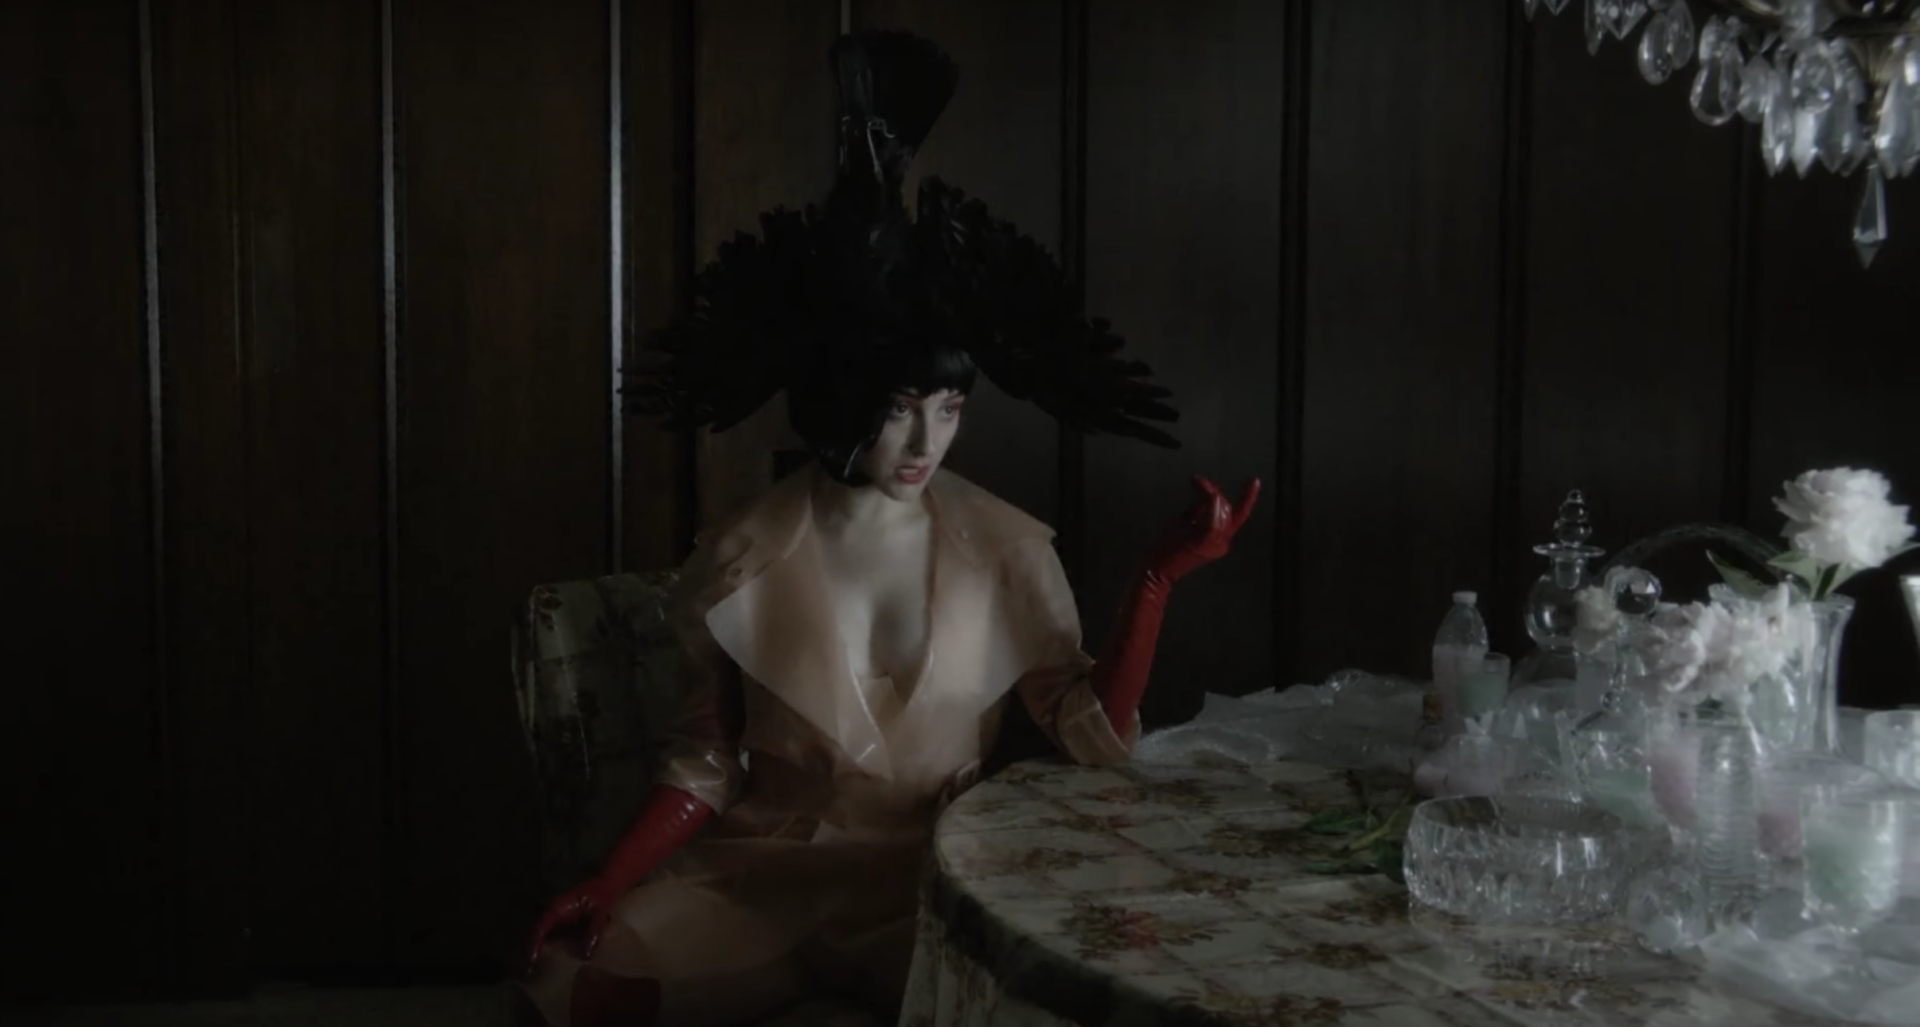 BANKS takes a darkly weird and memorable turn in “Trainwreck” video